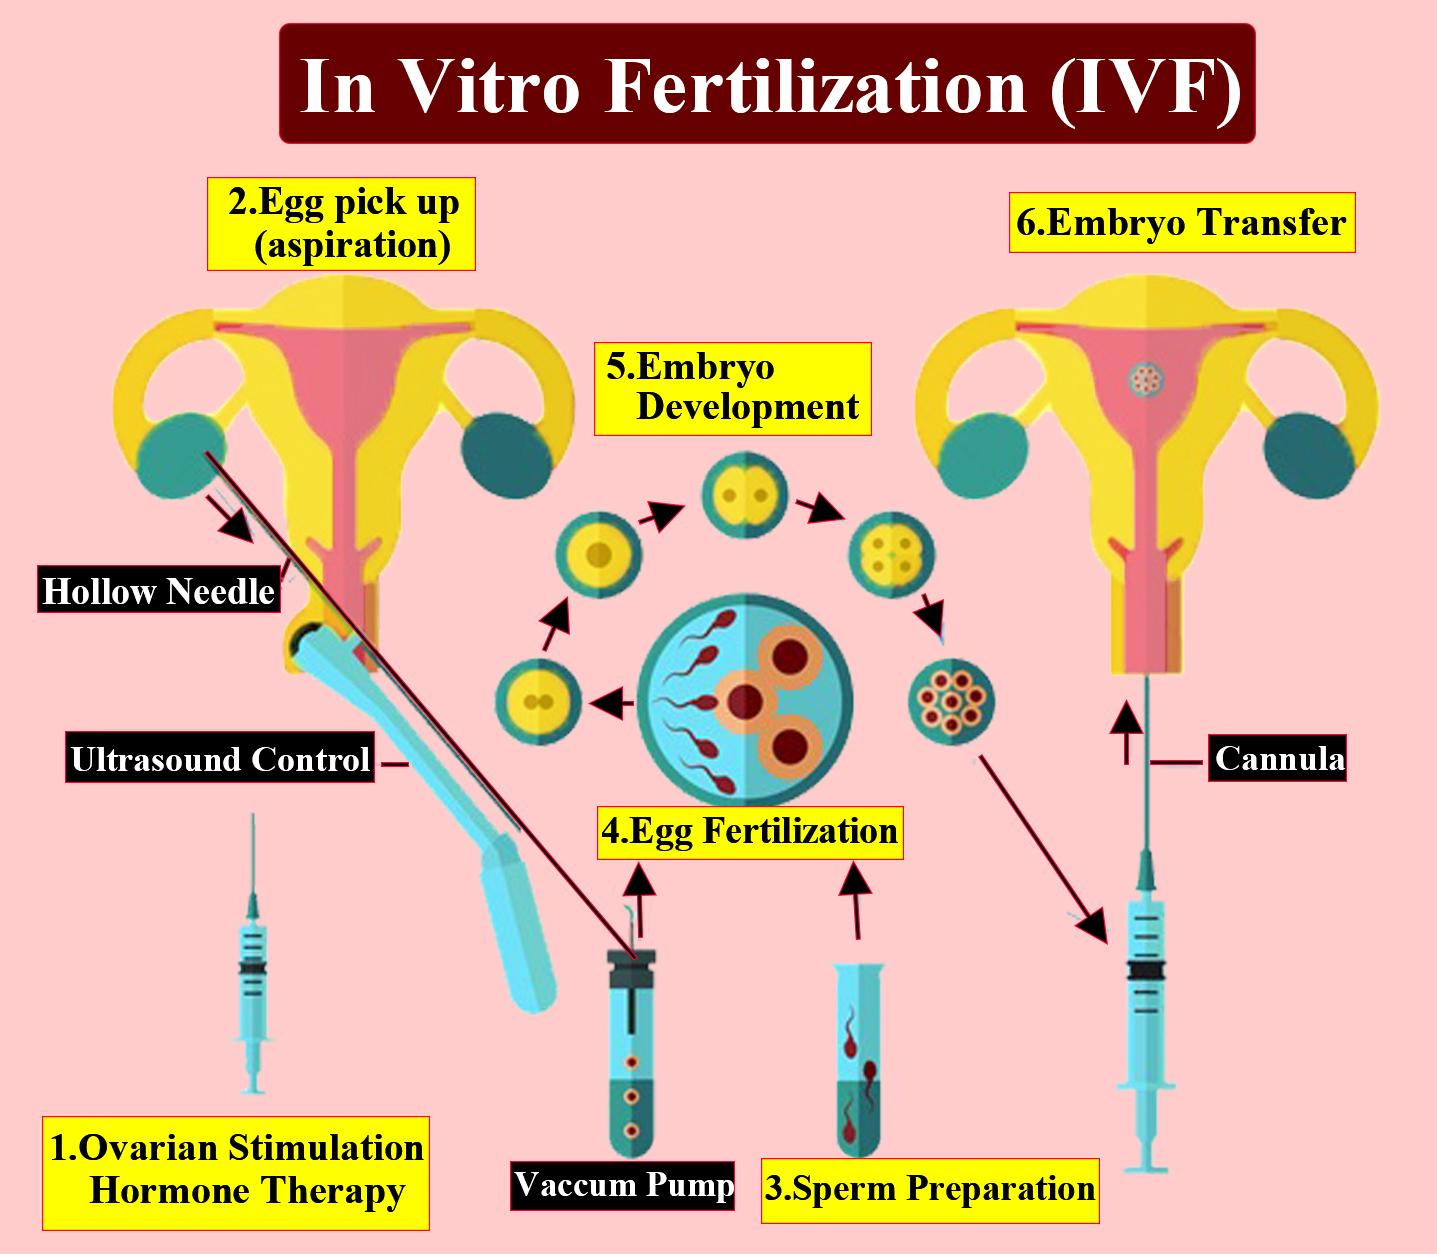 Suggest and explain the assisted reproductive techniques which will help a couple to have children, where the female had a blockage in the fallopian tube and the male partner had a low